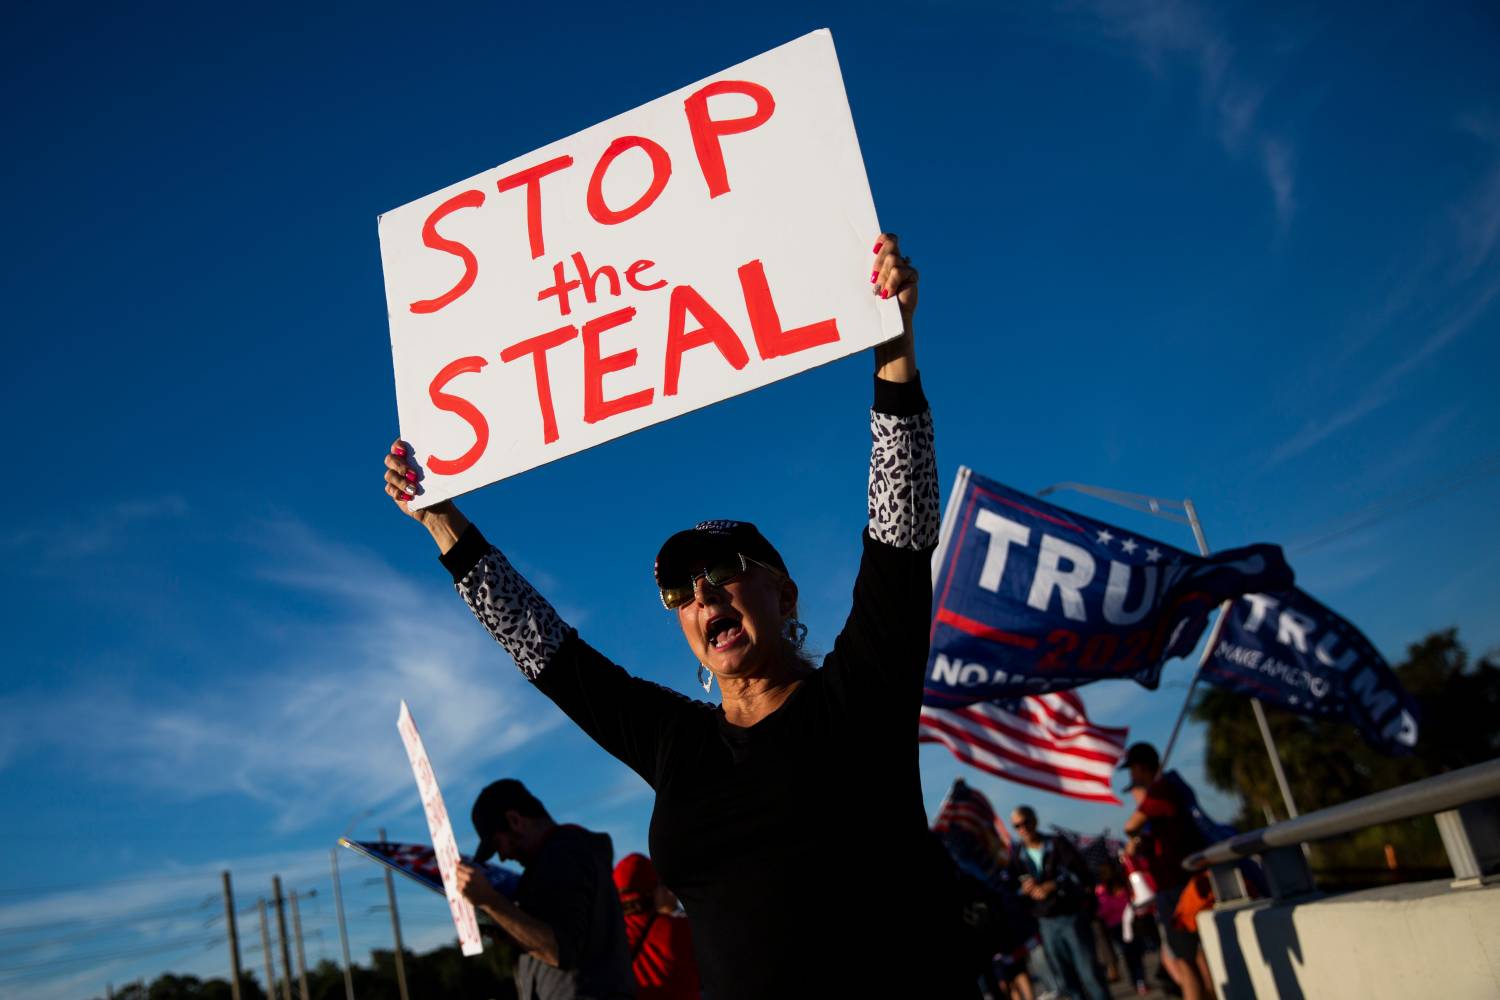 A protester holds a sign reading "stop the steal" at a pro-Trump protest.